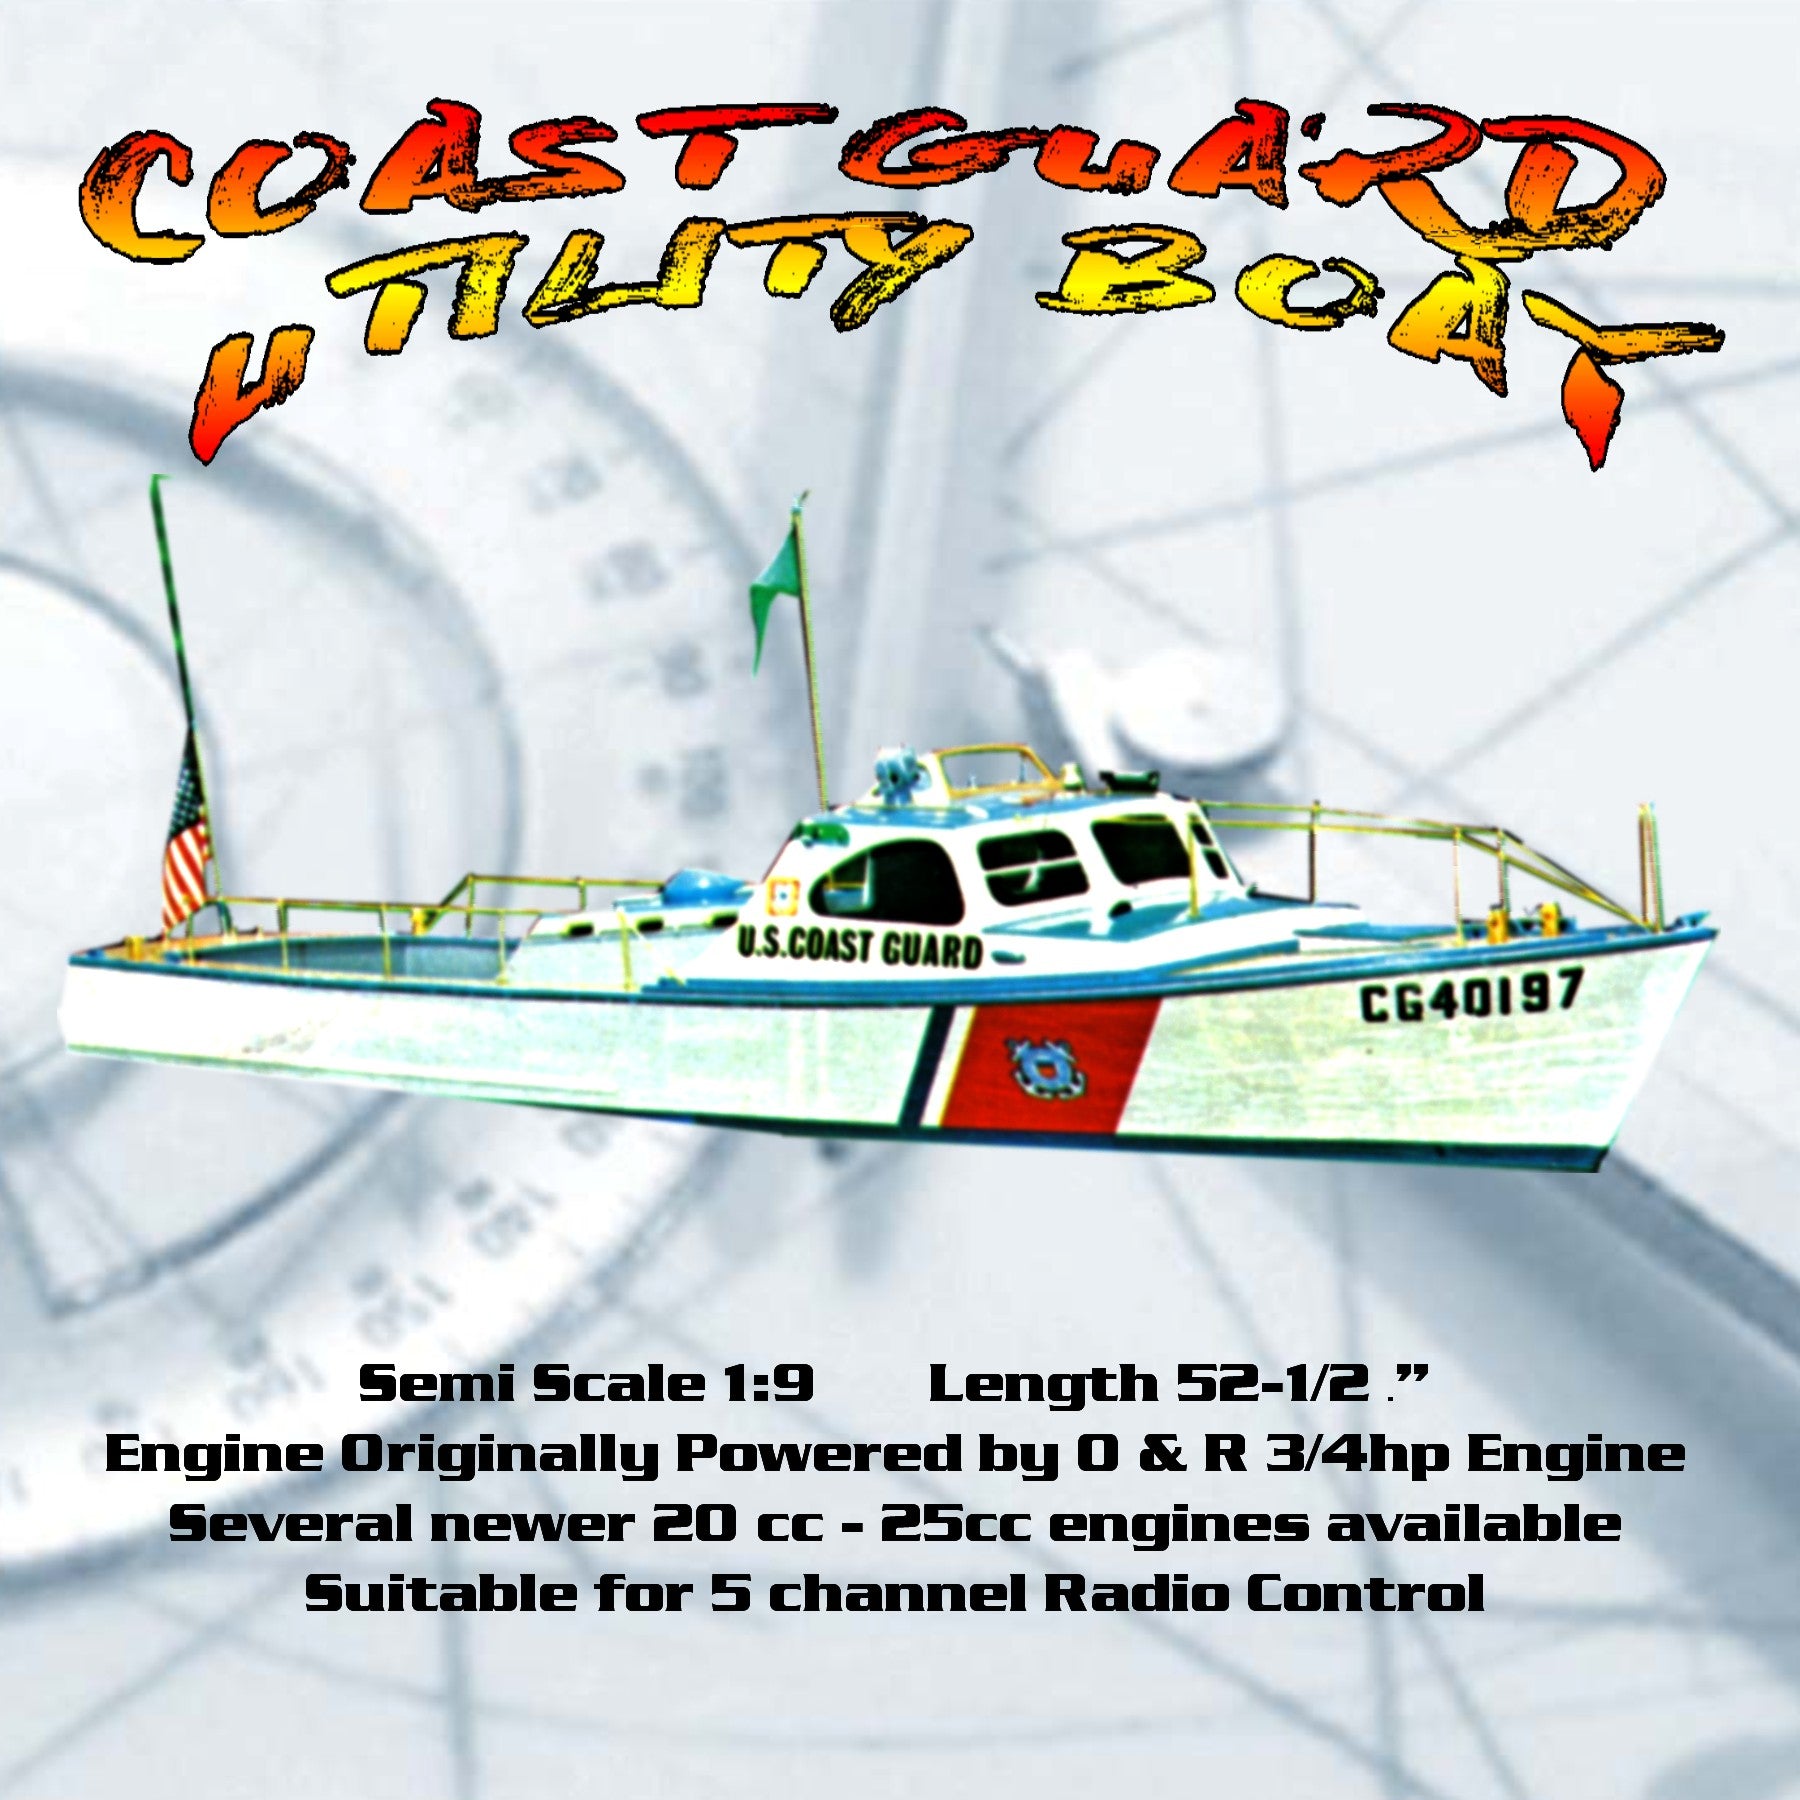 coast guard utility boat scale 1:9, 52 1/2", 20 to 25 cc full size printed plans and article for radio control